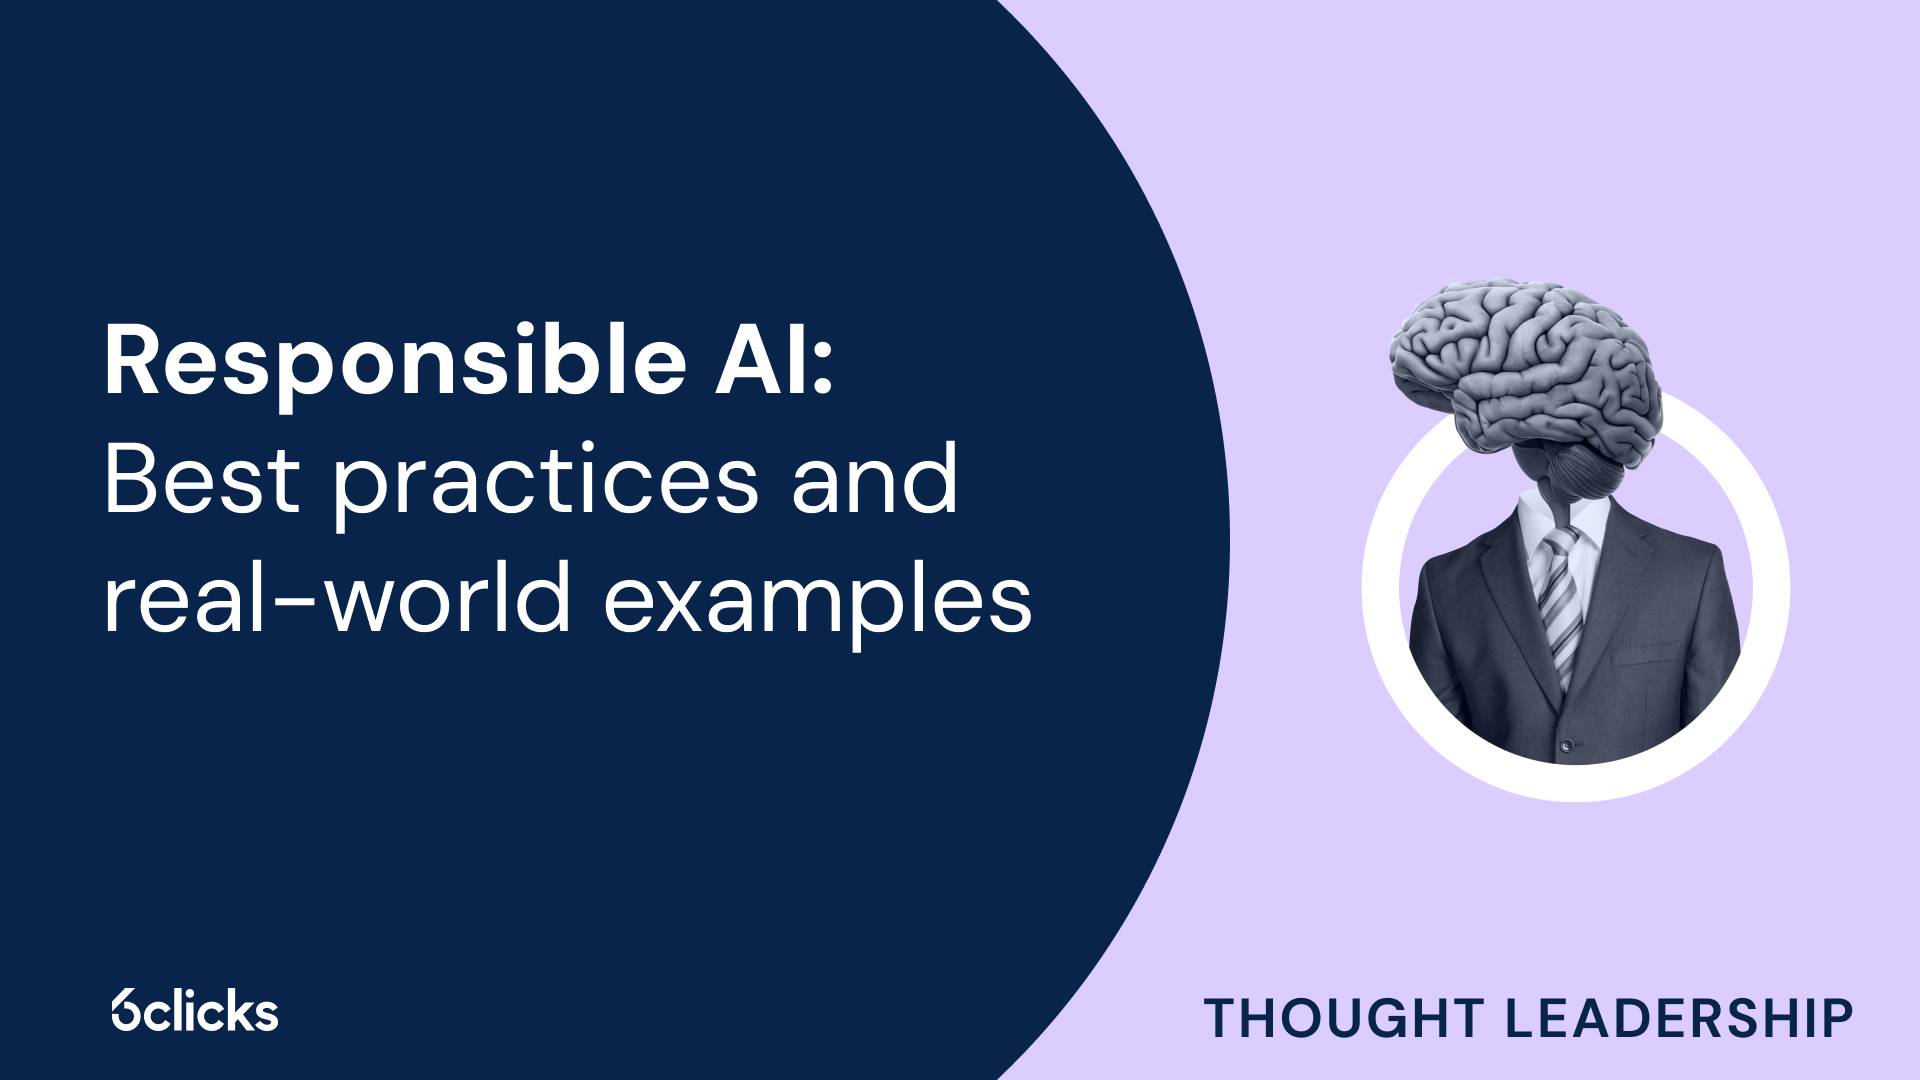 Responsible AI: Best practices and real-world examples